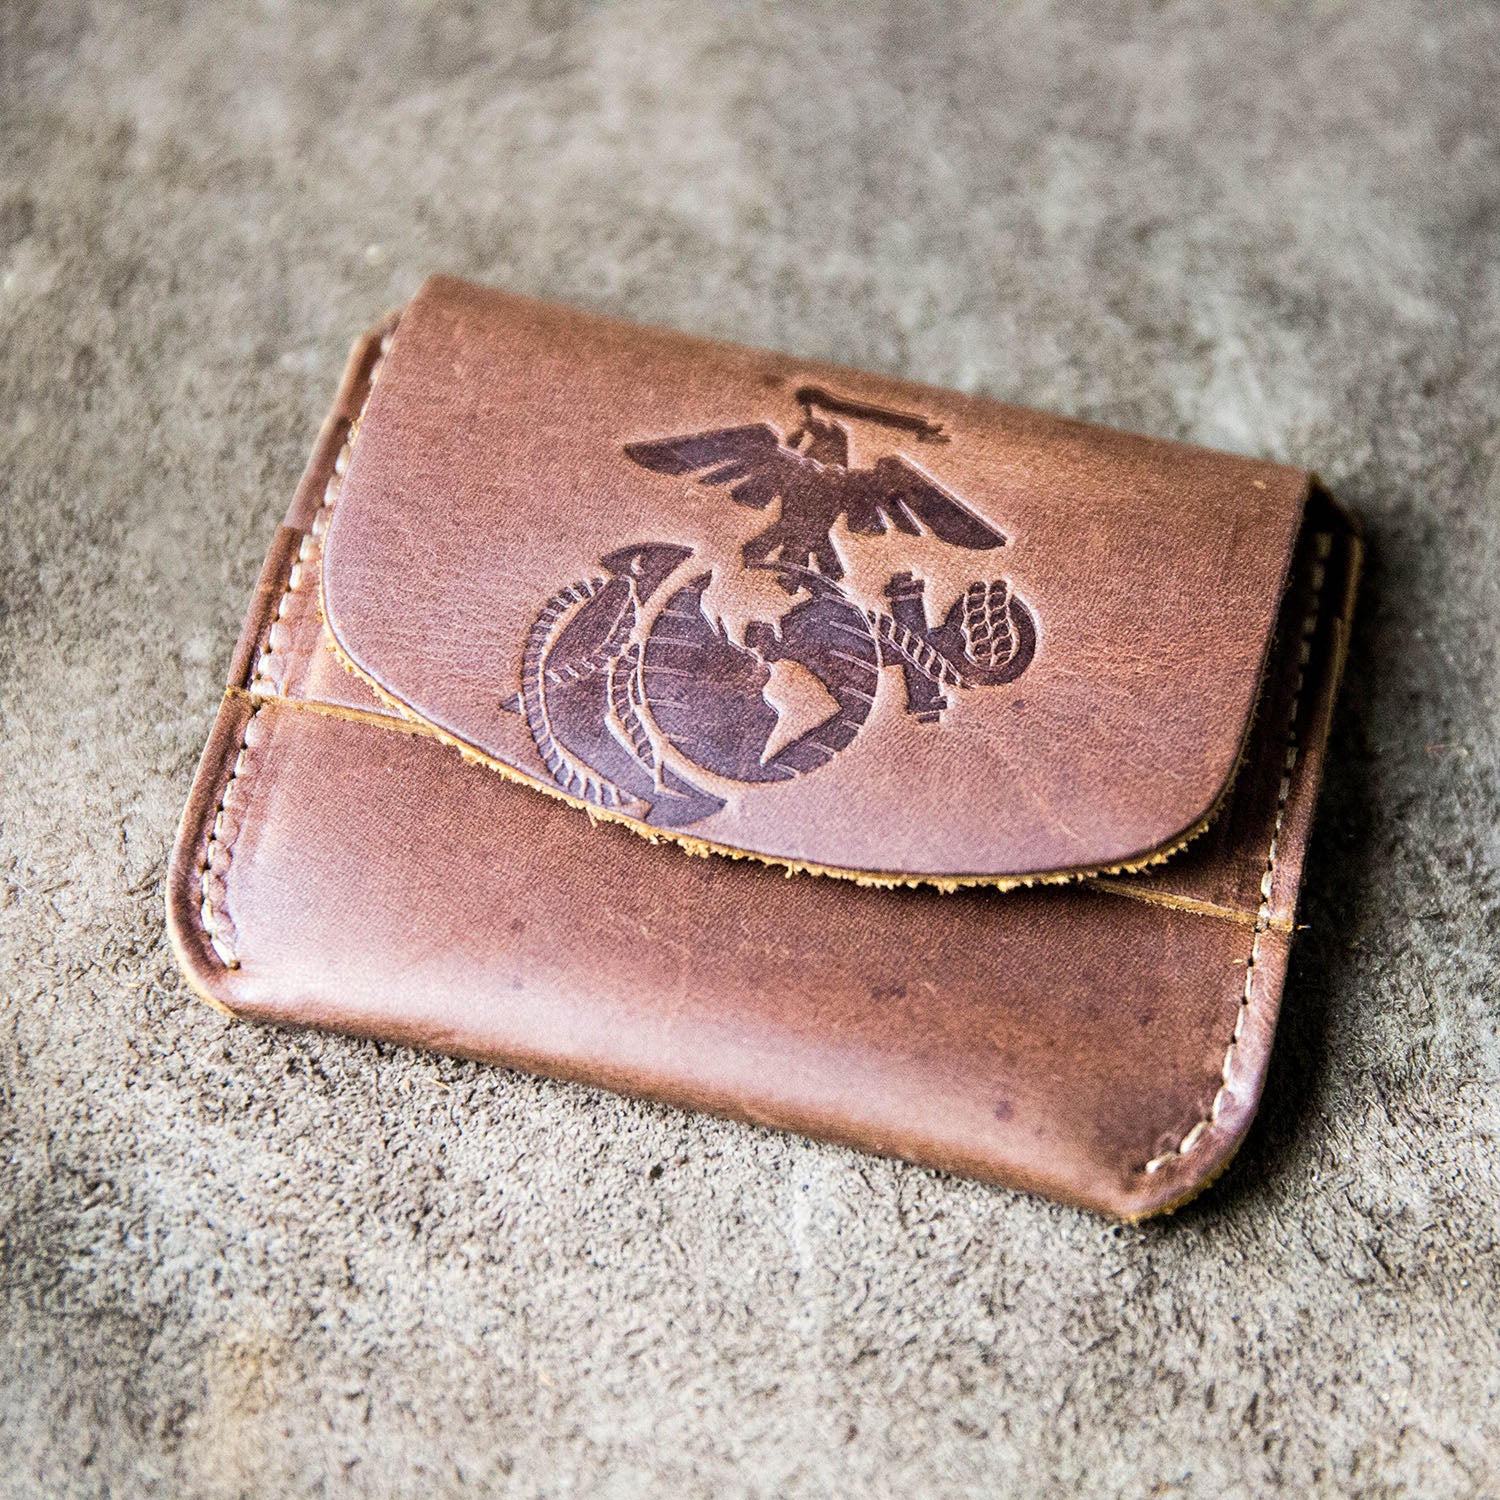 Fine leather front pocket wallet with flap closure and Marine Corps logo